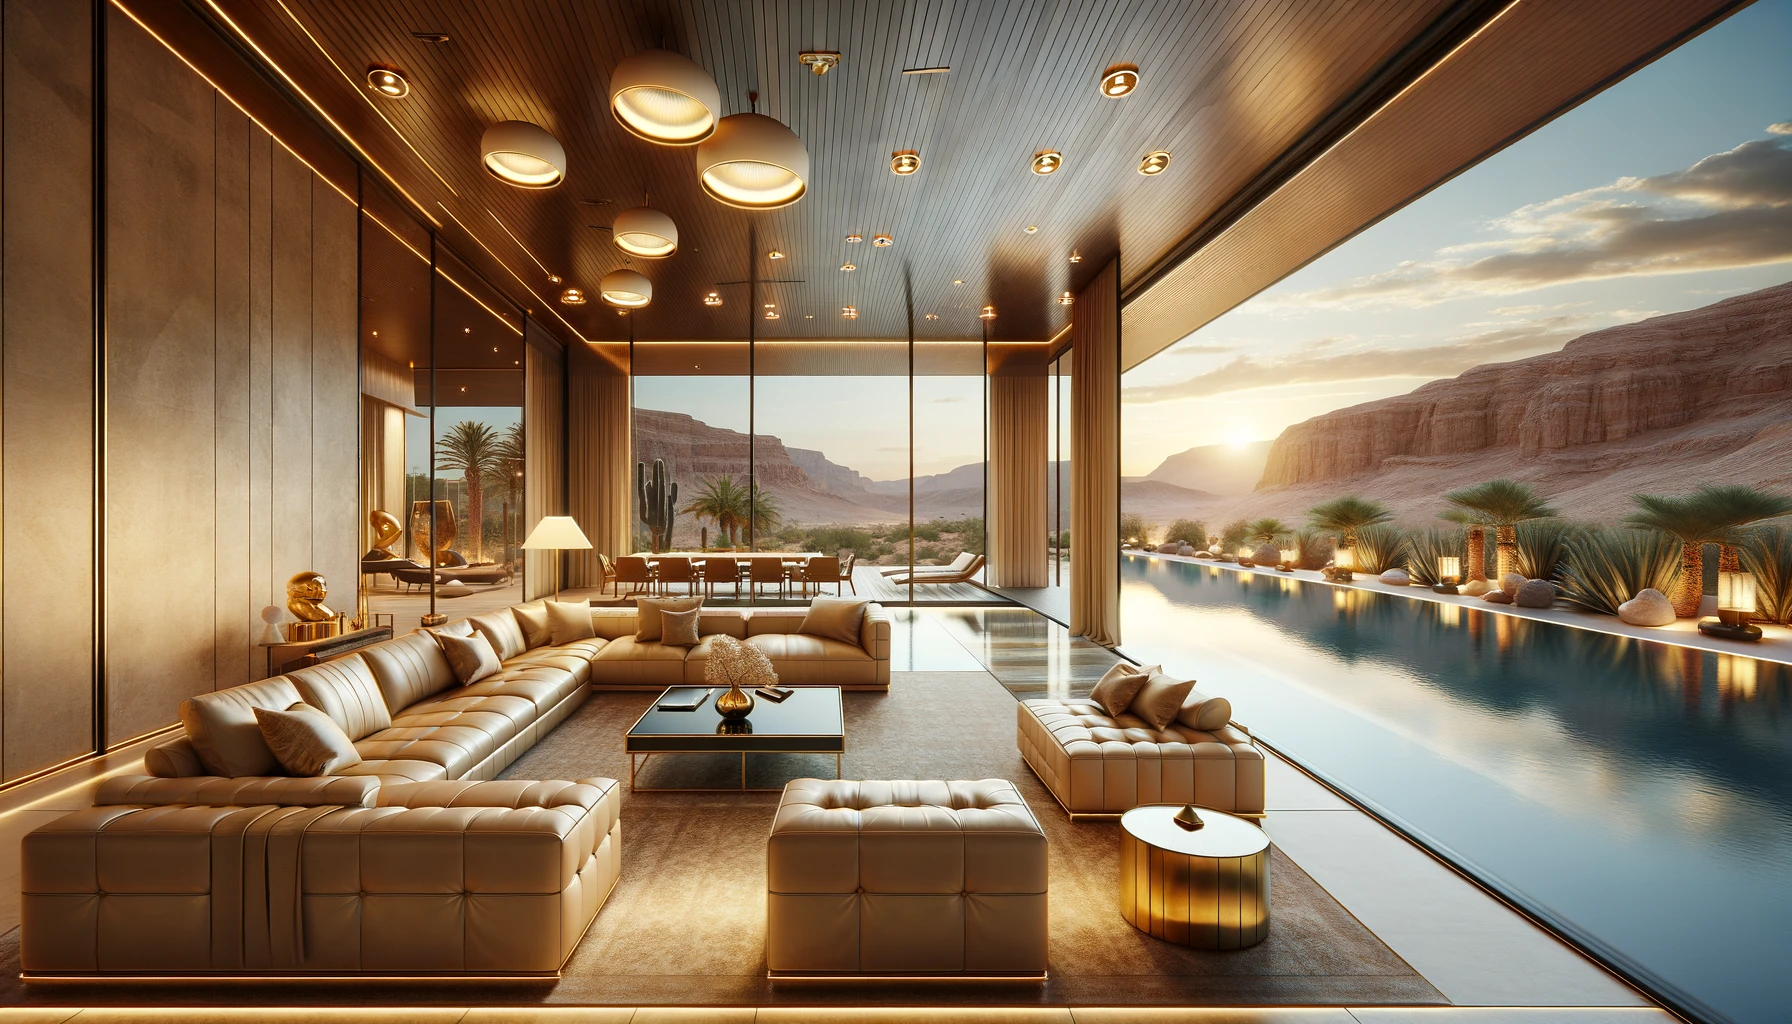 Key Conventions and events for airbnb: Elegant modern home interior with harmonious golden accents, overlooking a stunning infinity pool that merges into a typical Las Vegas desert landscape.